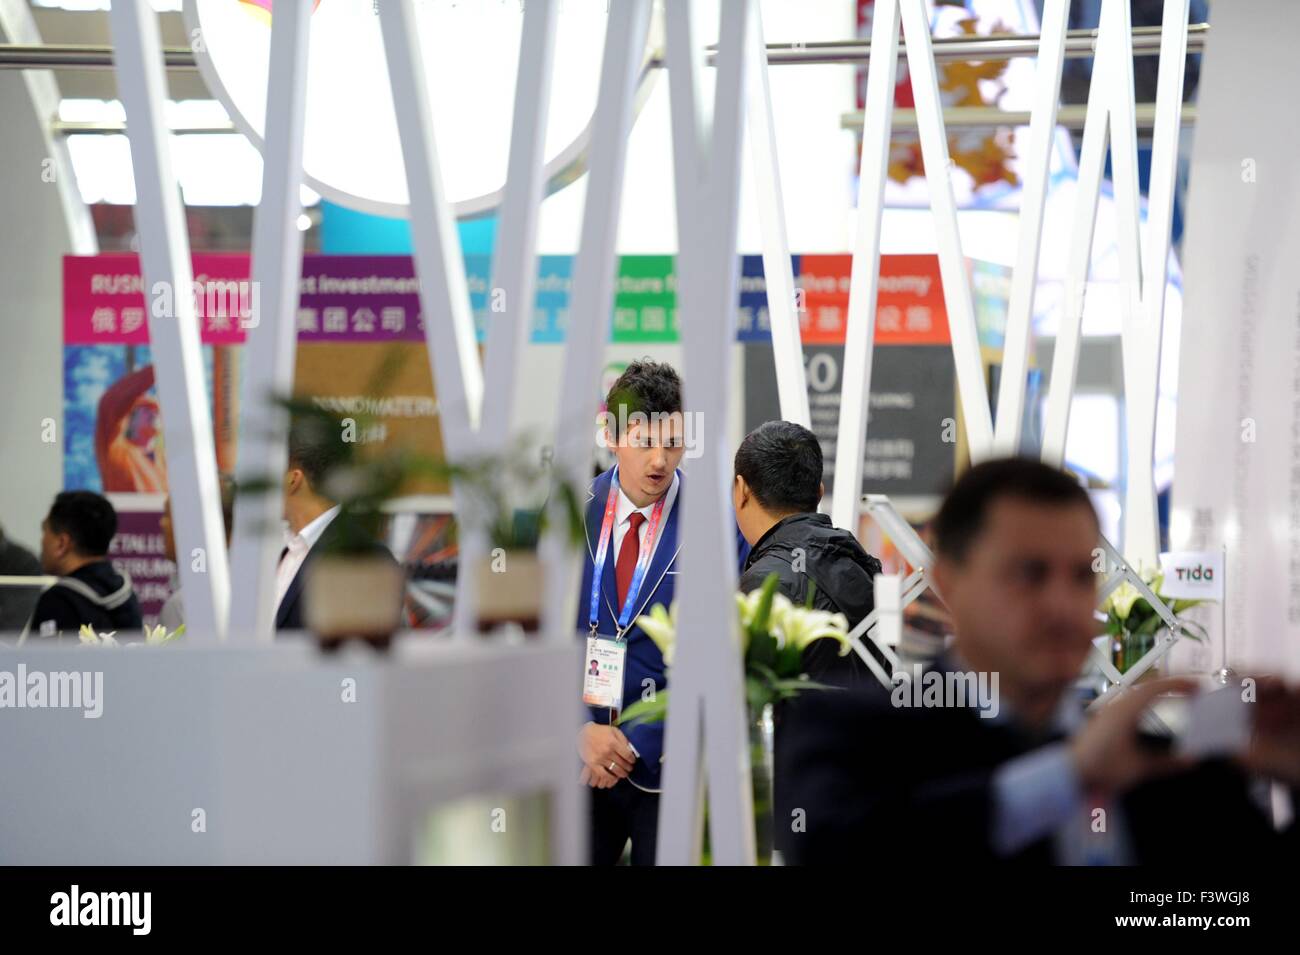 (151013) -- HARBIN, Oct. 13, 2015 (Xinhua) -- An exhibitor talks with an enterprise representative at the booth of Russian republic of Tatarstan during the second China-Russia Exposition in Harbin, northeast China's Heilongjiang Province, Oct. 13, 2015. Nearly 10,000 businessmen from 103 countries and regions attended the expo. The event will last till Oct. 16, 2015. (Xinhua/Wang Song)  (zhs) Stock Photo